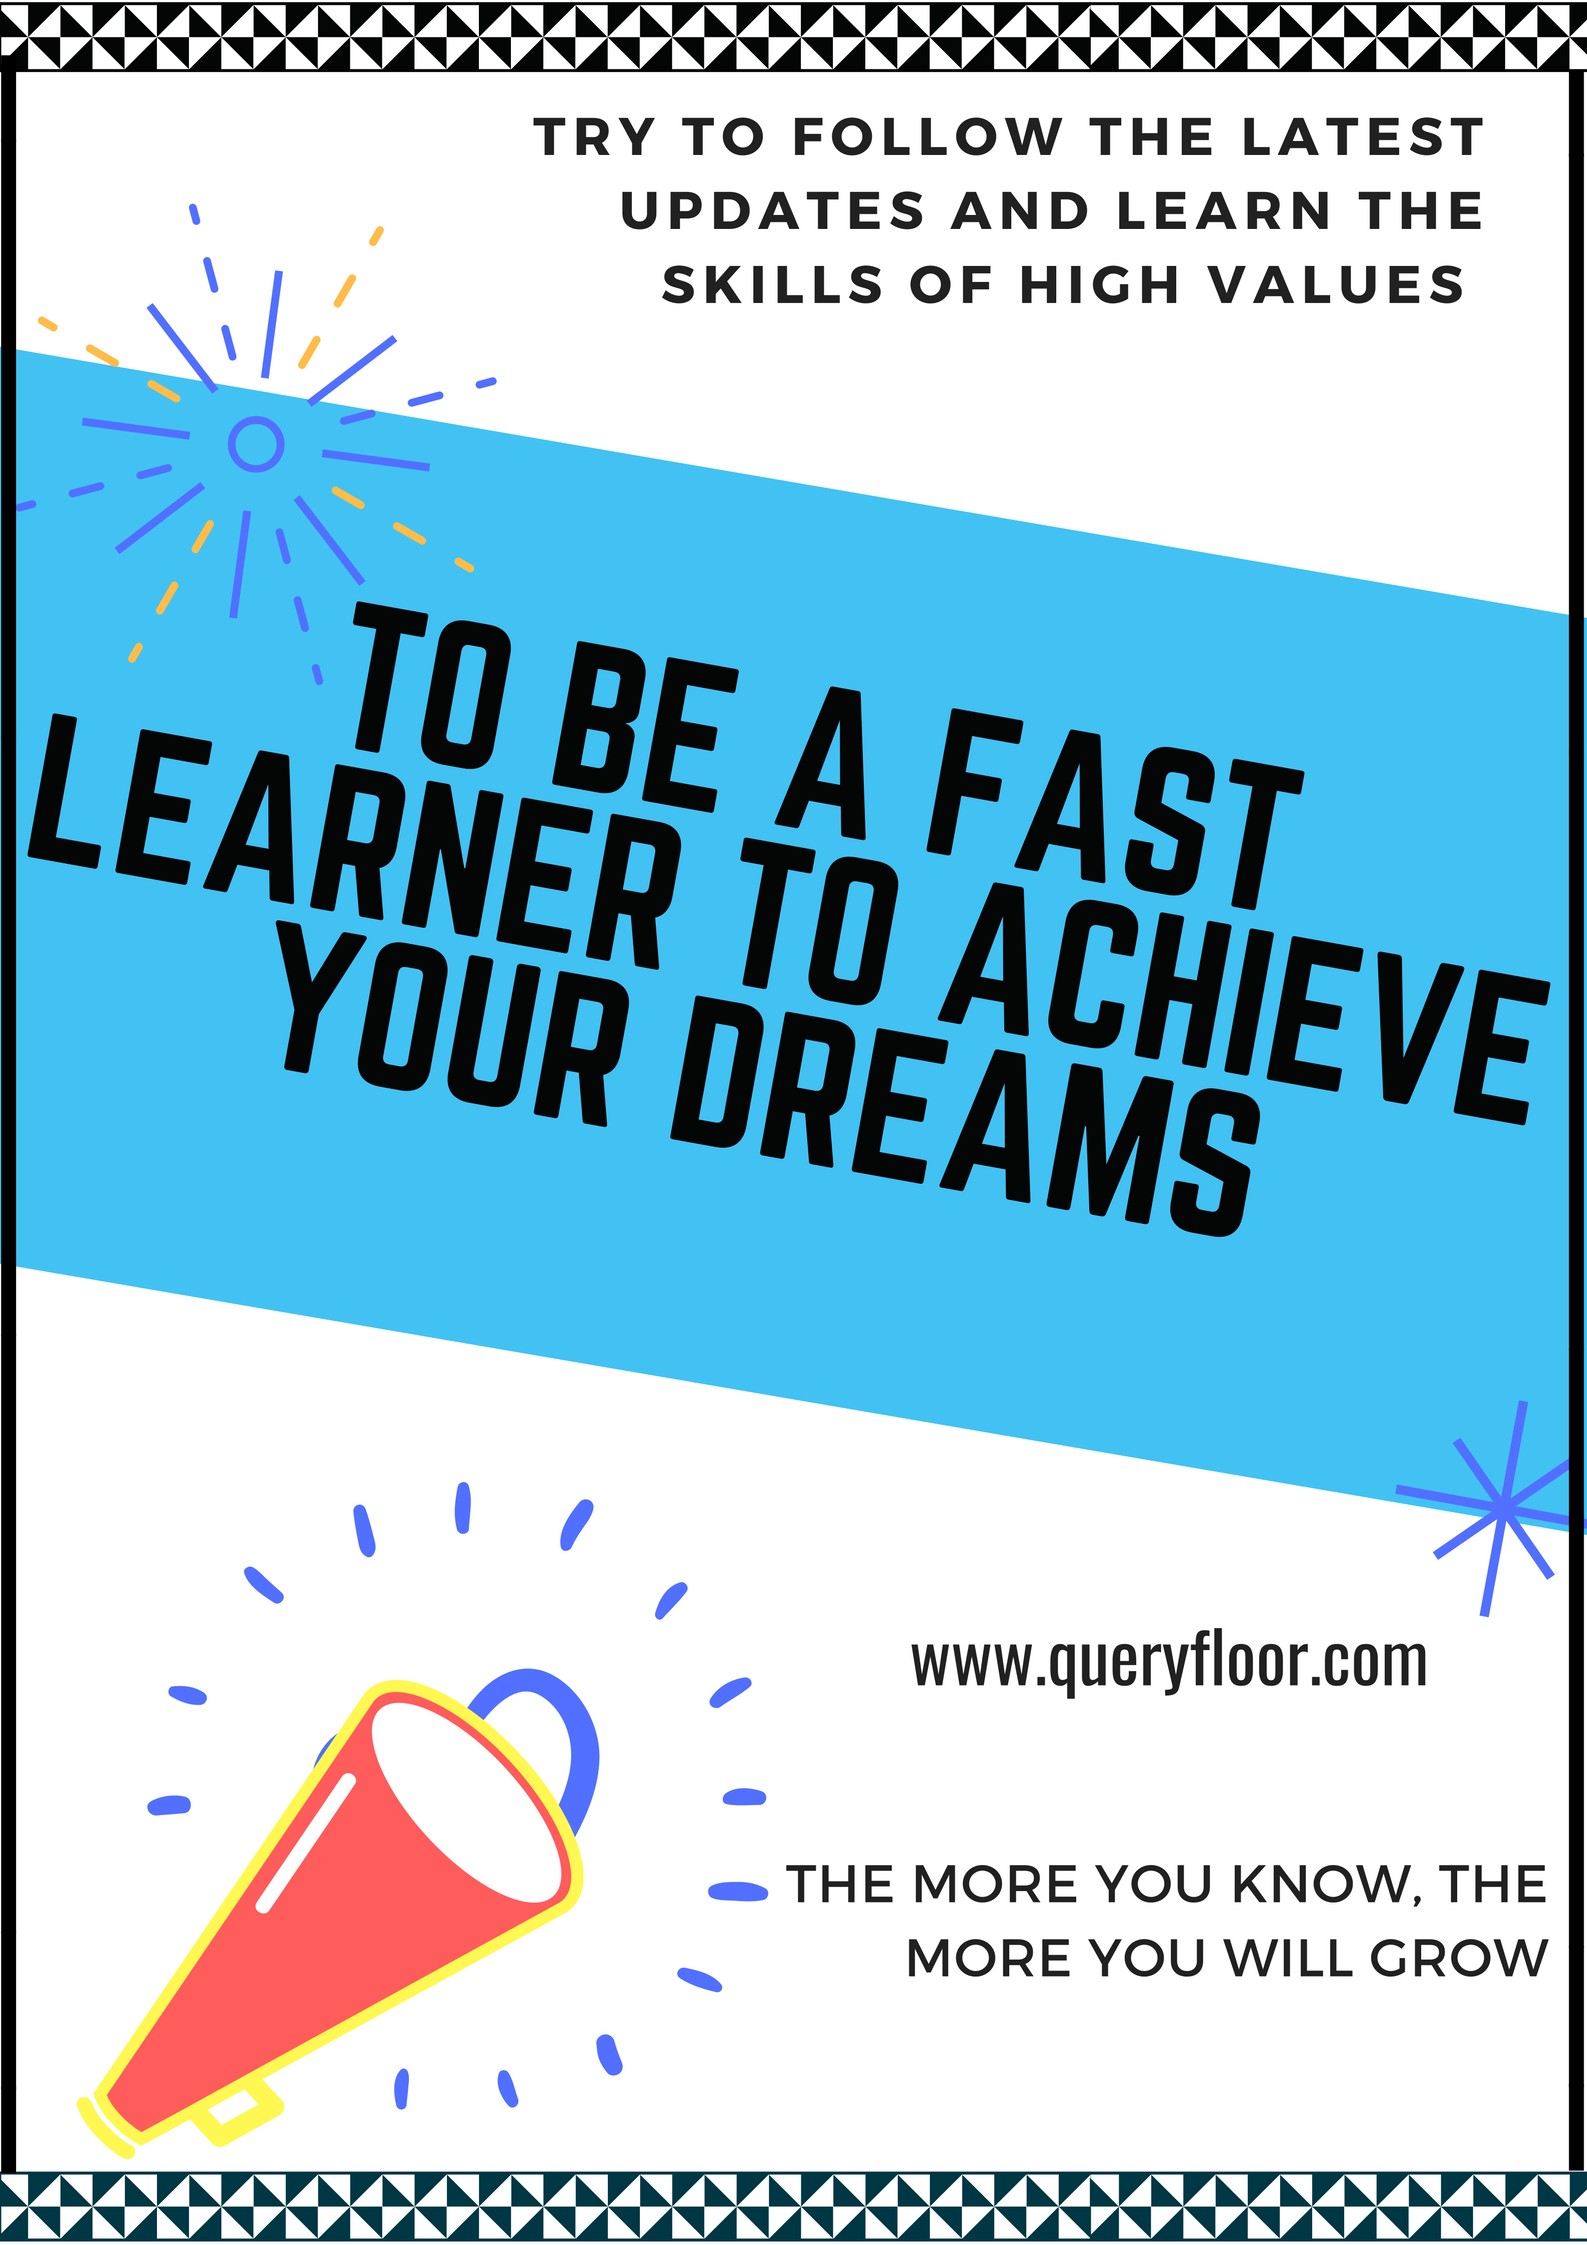 To be a fast learner to achieve your dreams